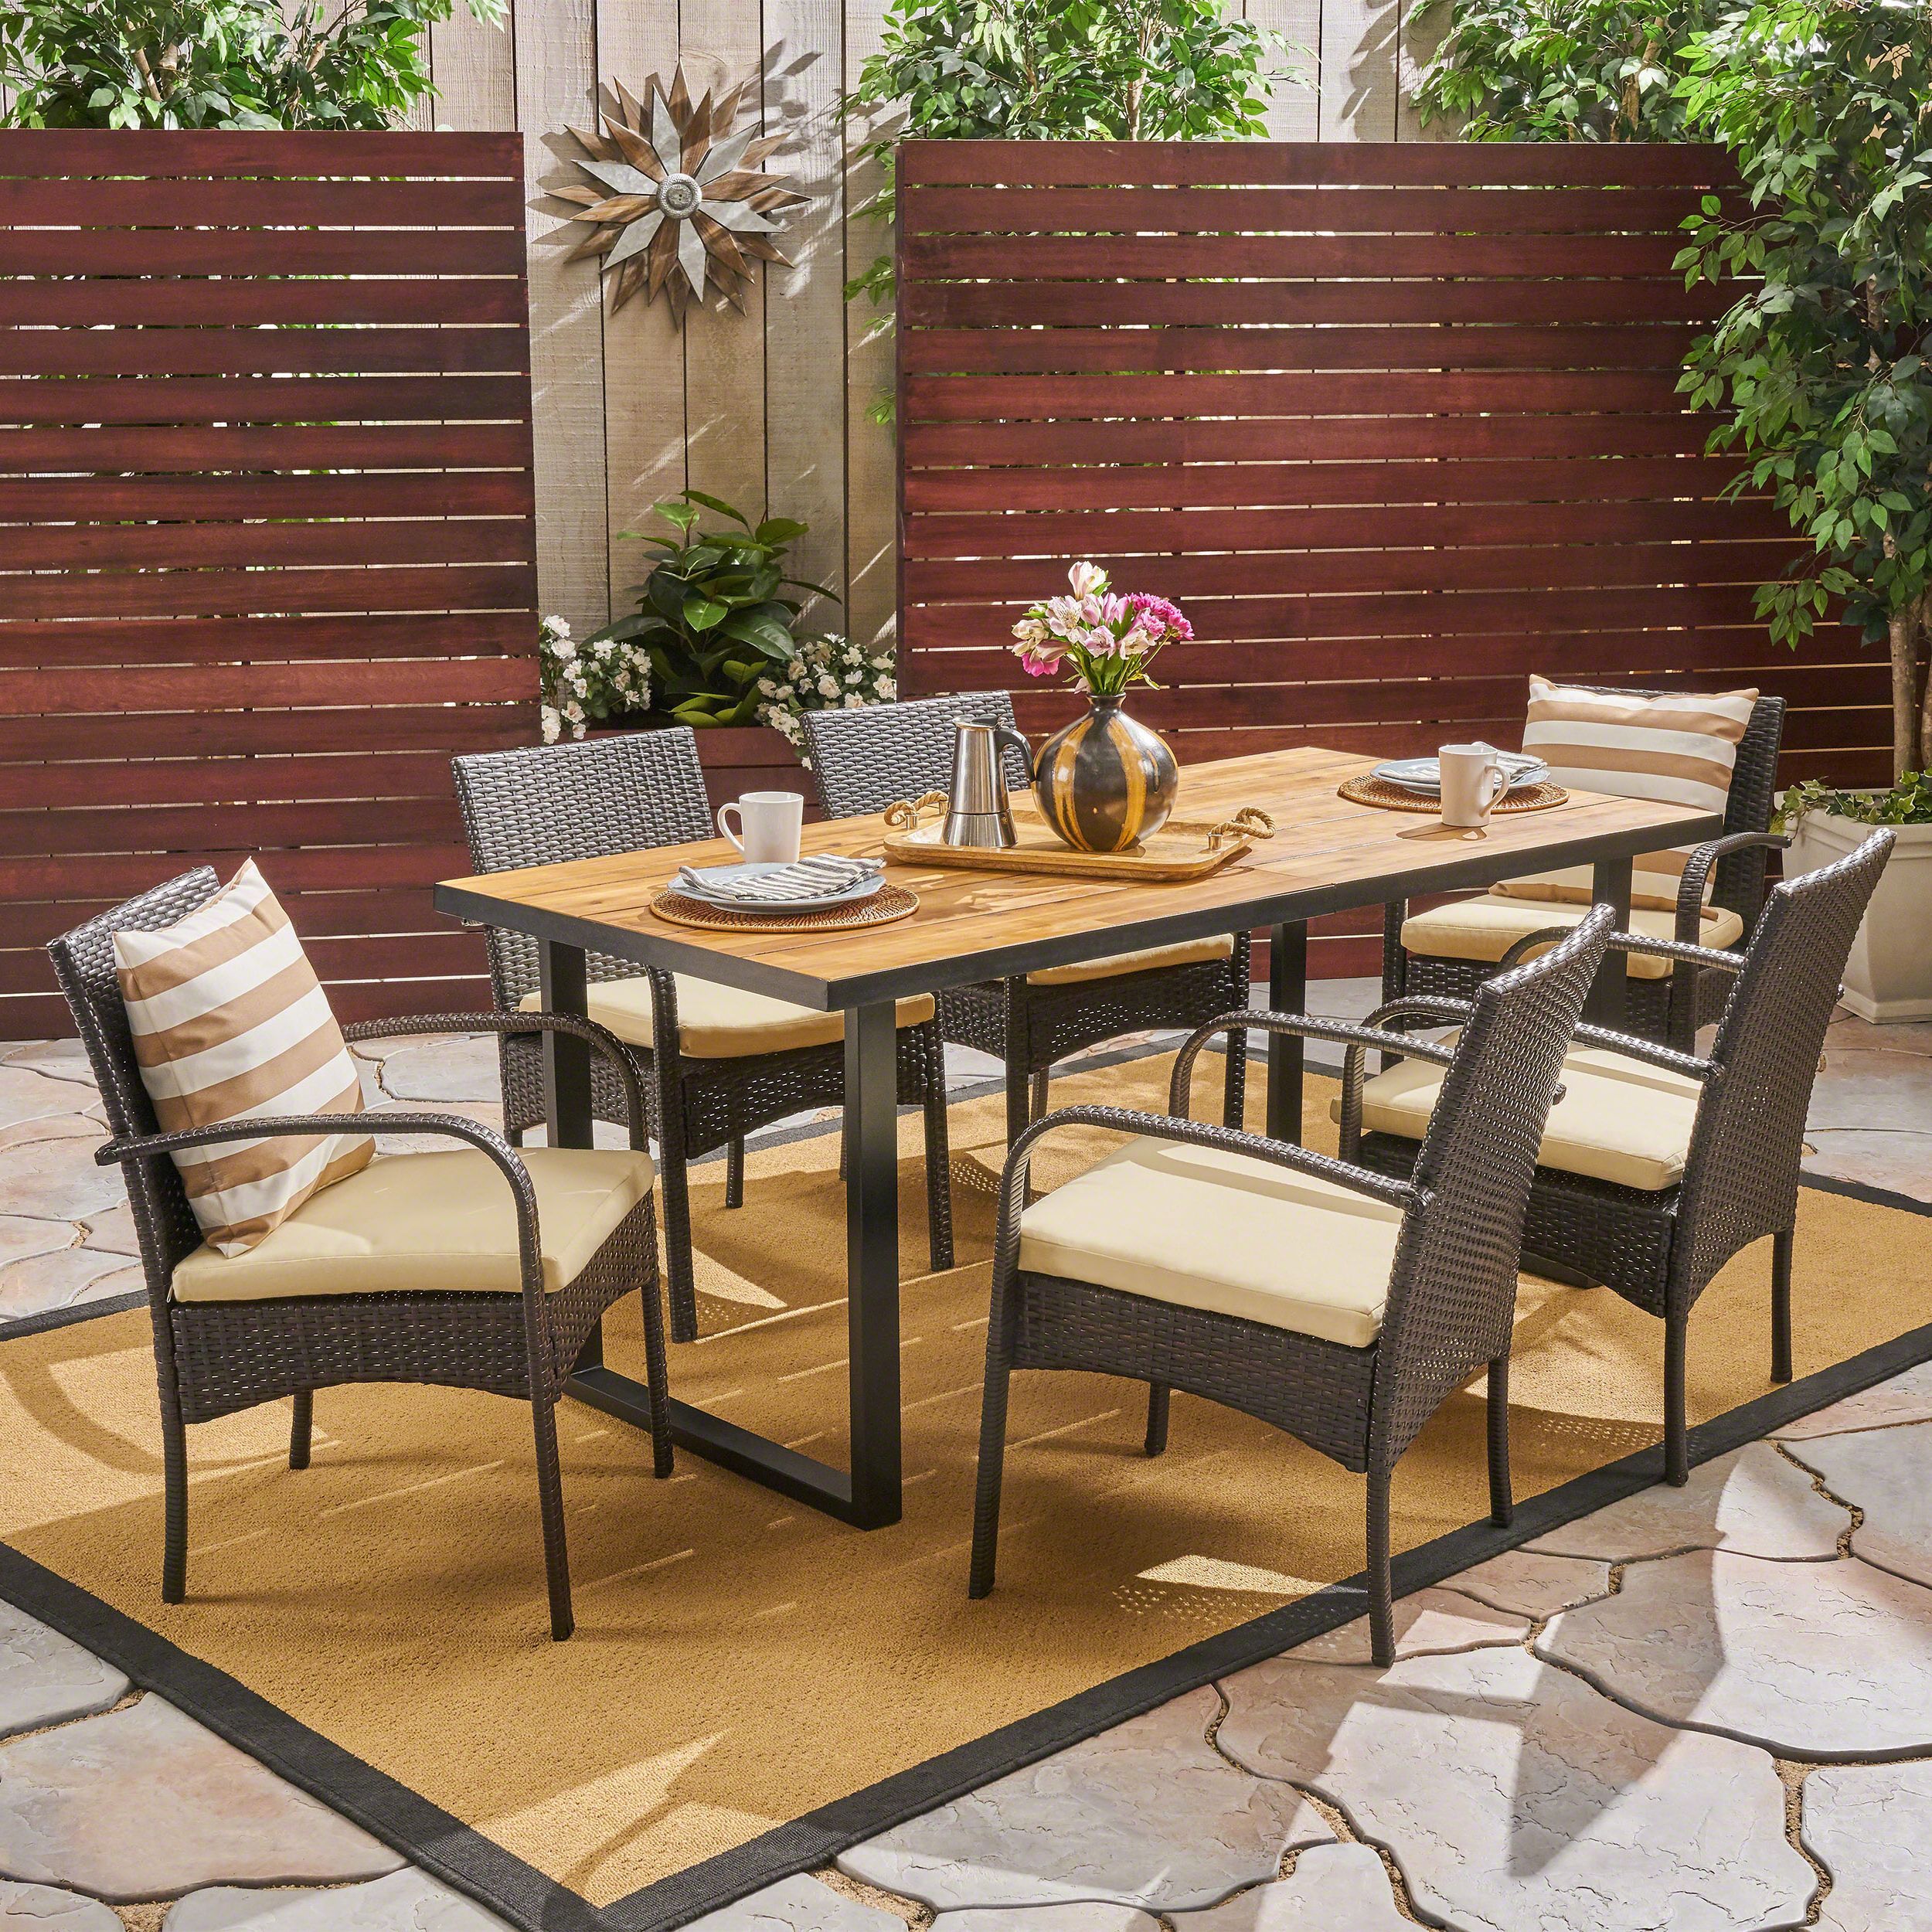 Well Liked Juliet Outdoor 7 Piece Acacia Wood And Wicker Rectangular Dining Set Regarding 7 Piece Patio Dining Sets With Cushions (View 2 of 15)